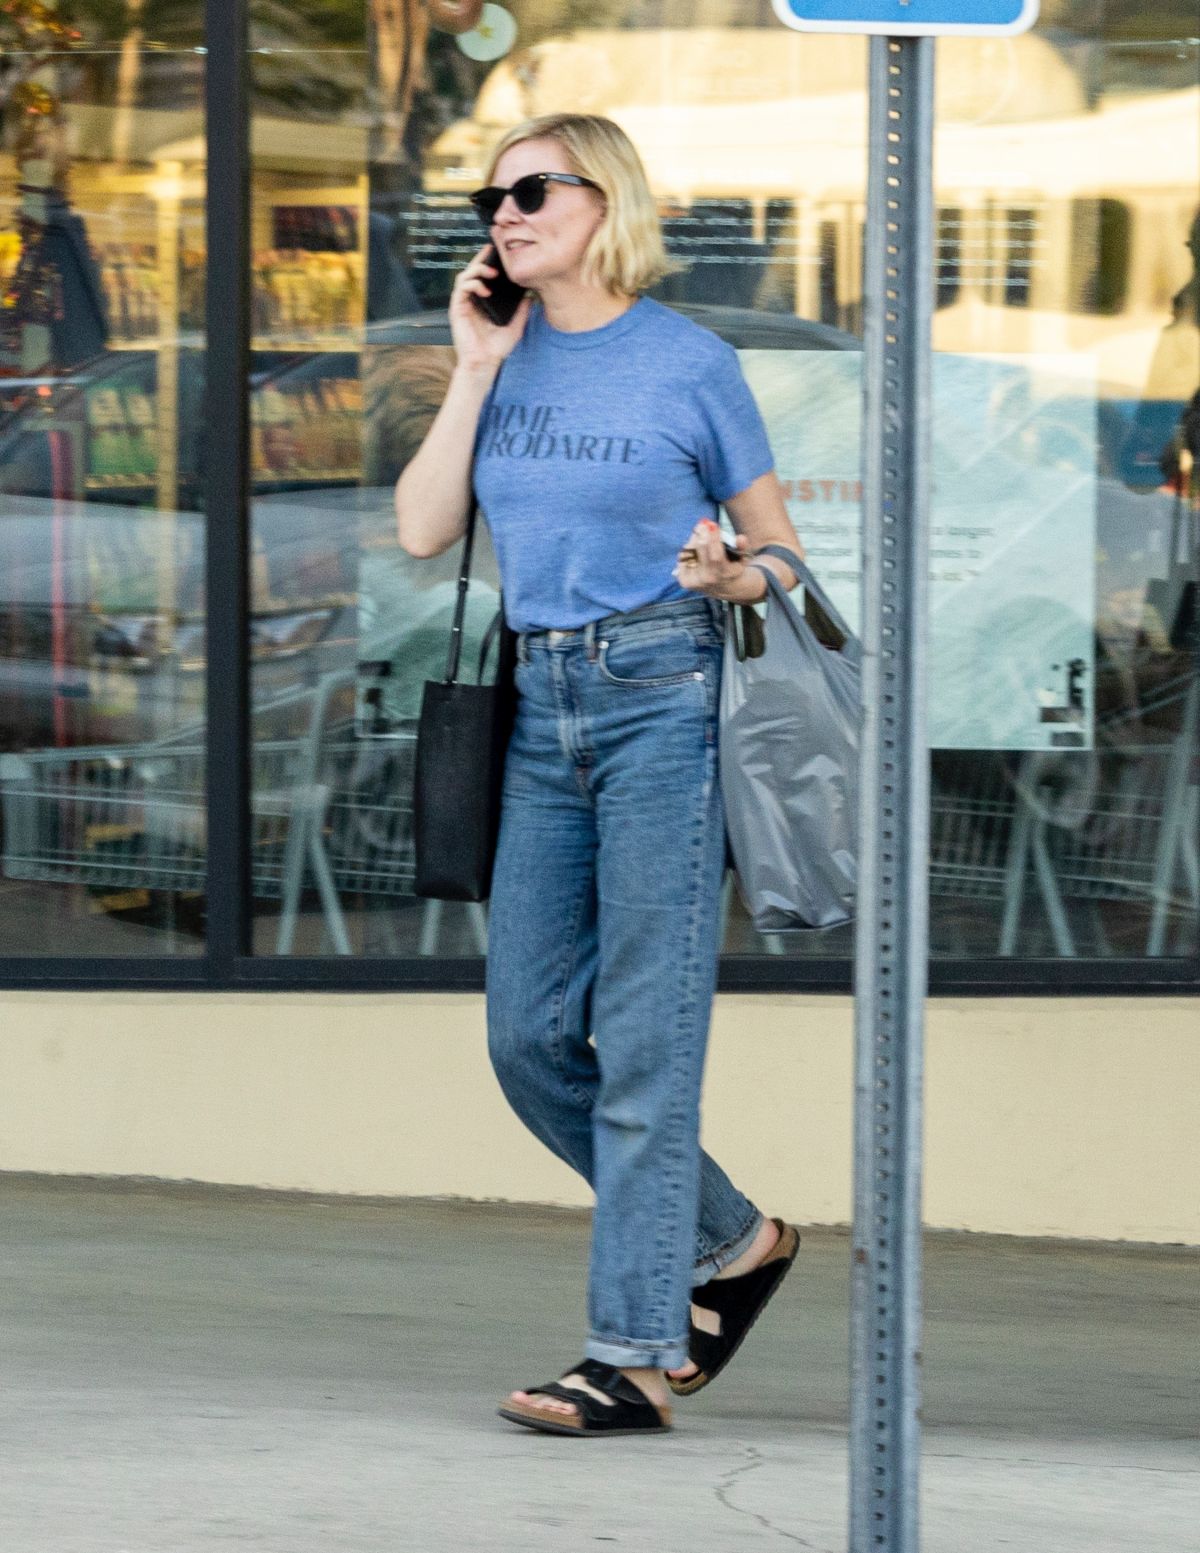 KIRSTEN DUNST Out Shopping in Burbank 10/18/2022 – HawtCelebs